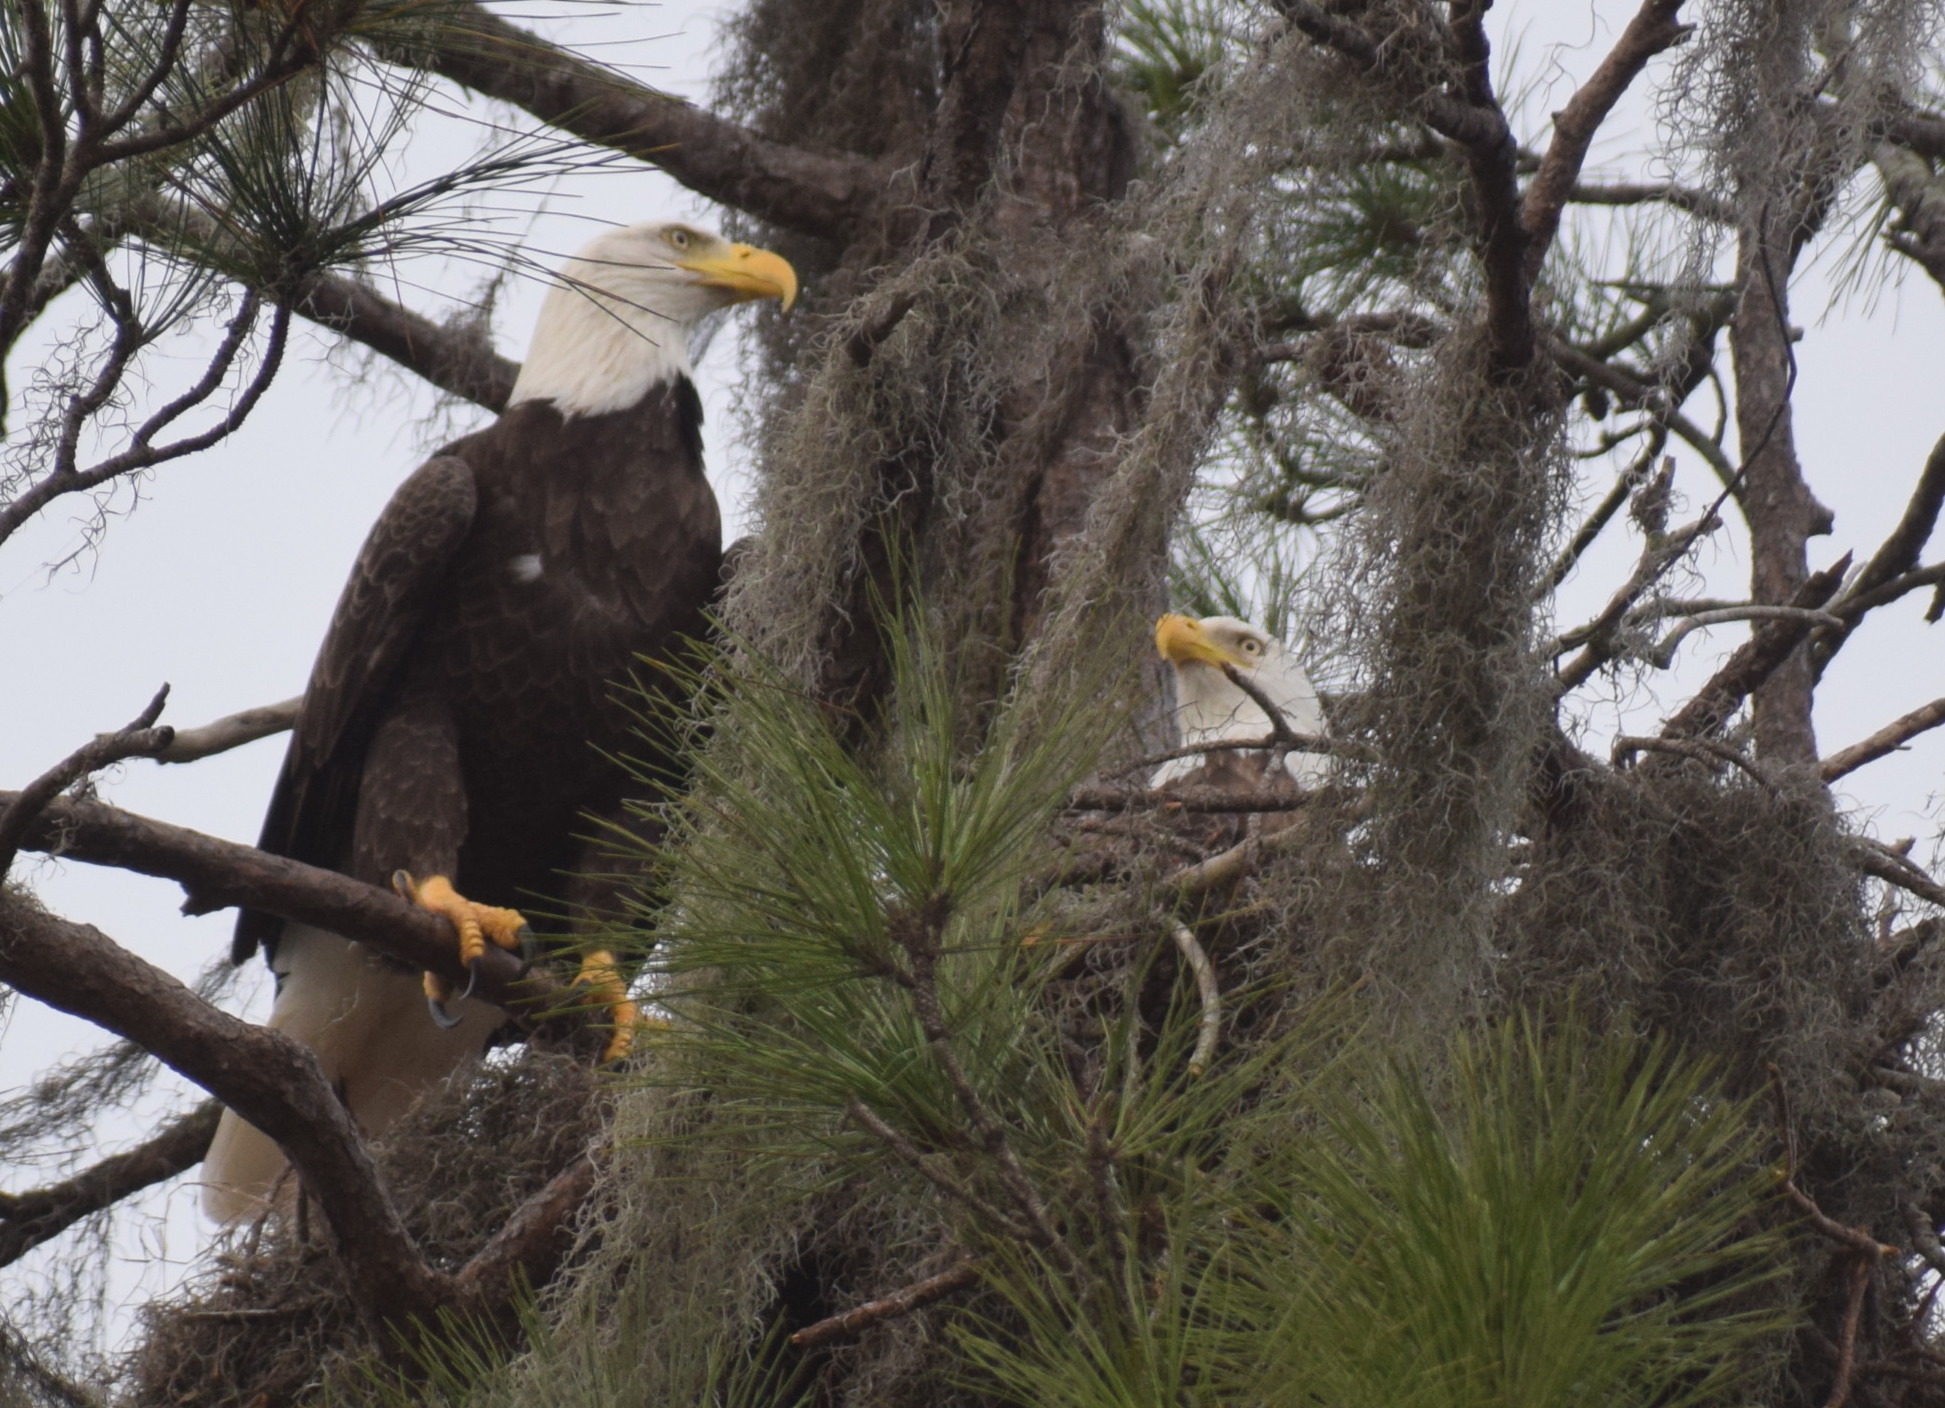 Bald eagles were removed from the endangered species list in 2007. (Photo by Jay Heater)